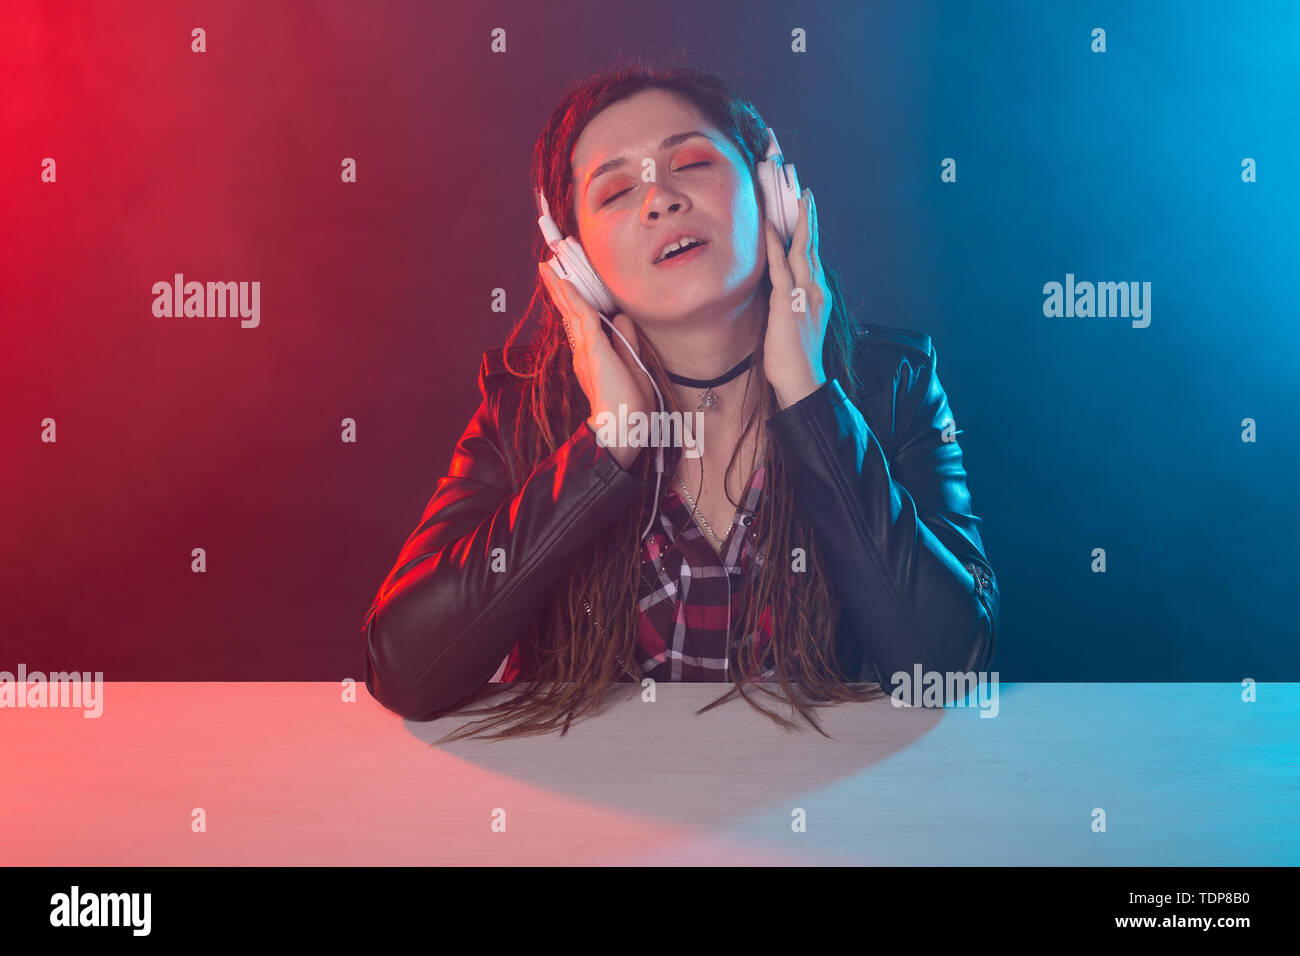 Meloman, music and people concept - young woman with dreadlocks listen to the music and enjoy it Stock Photo